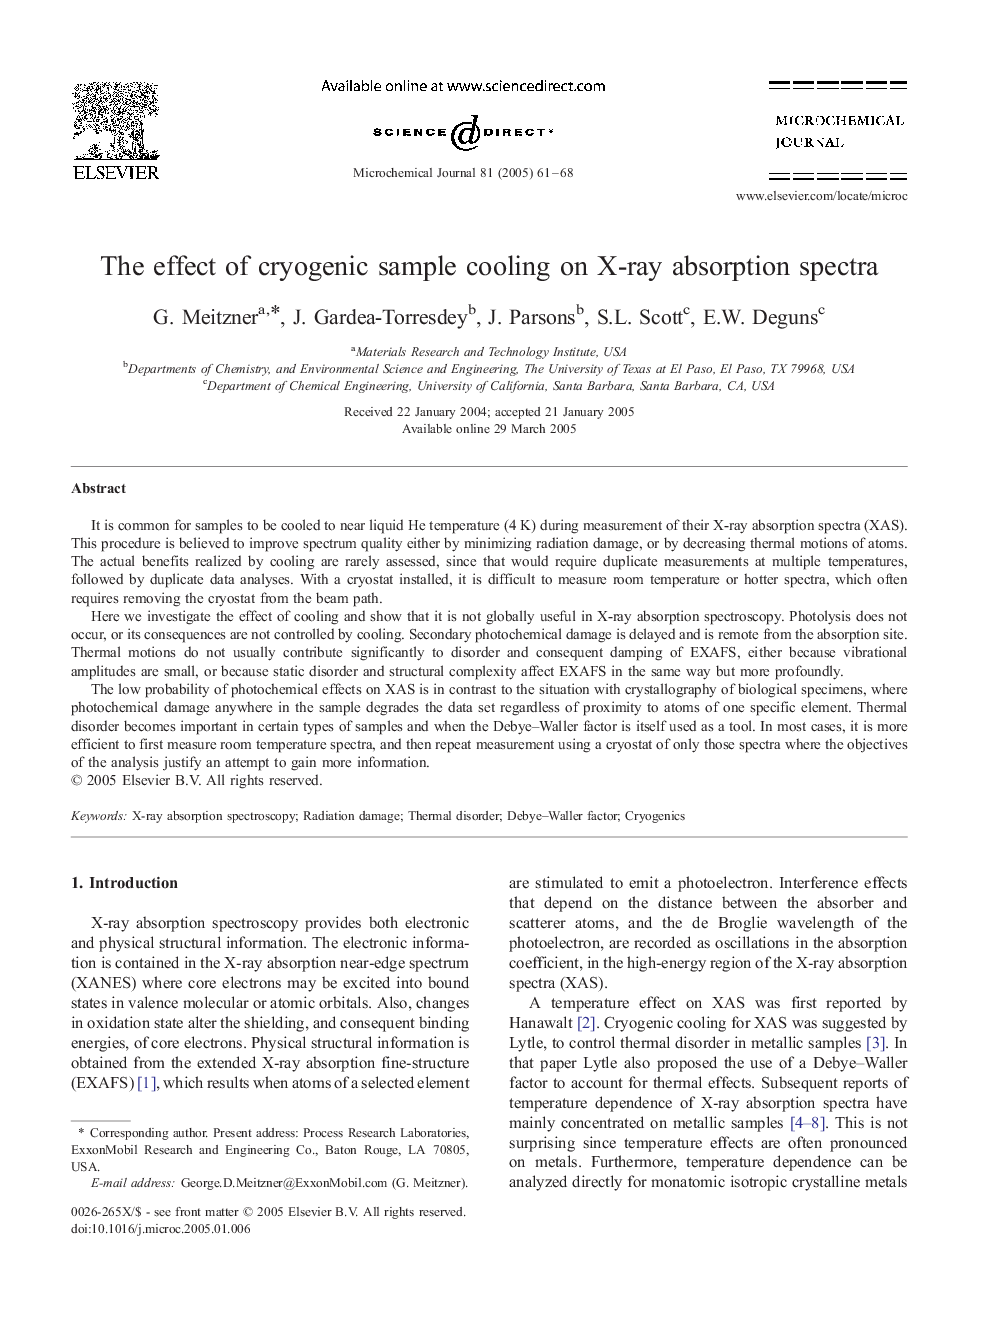 The effect of cryogenic sample cooling on X-ray absorption spectra